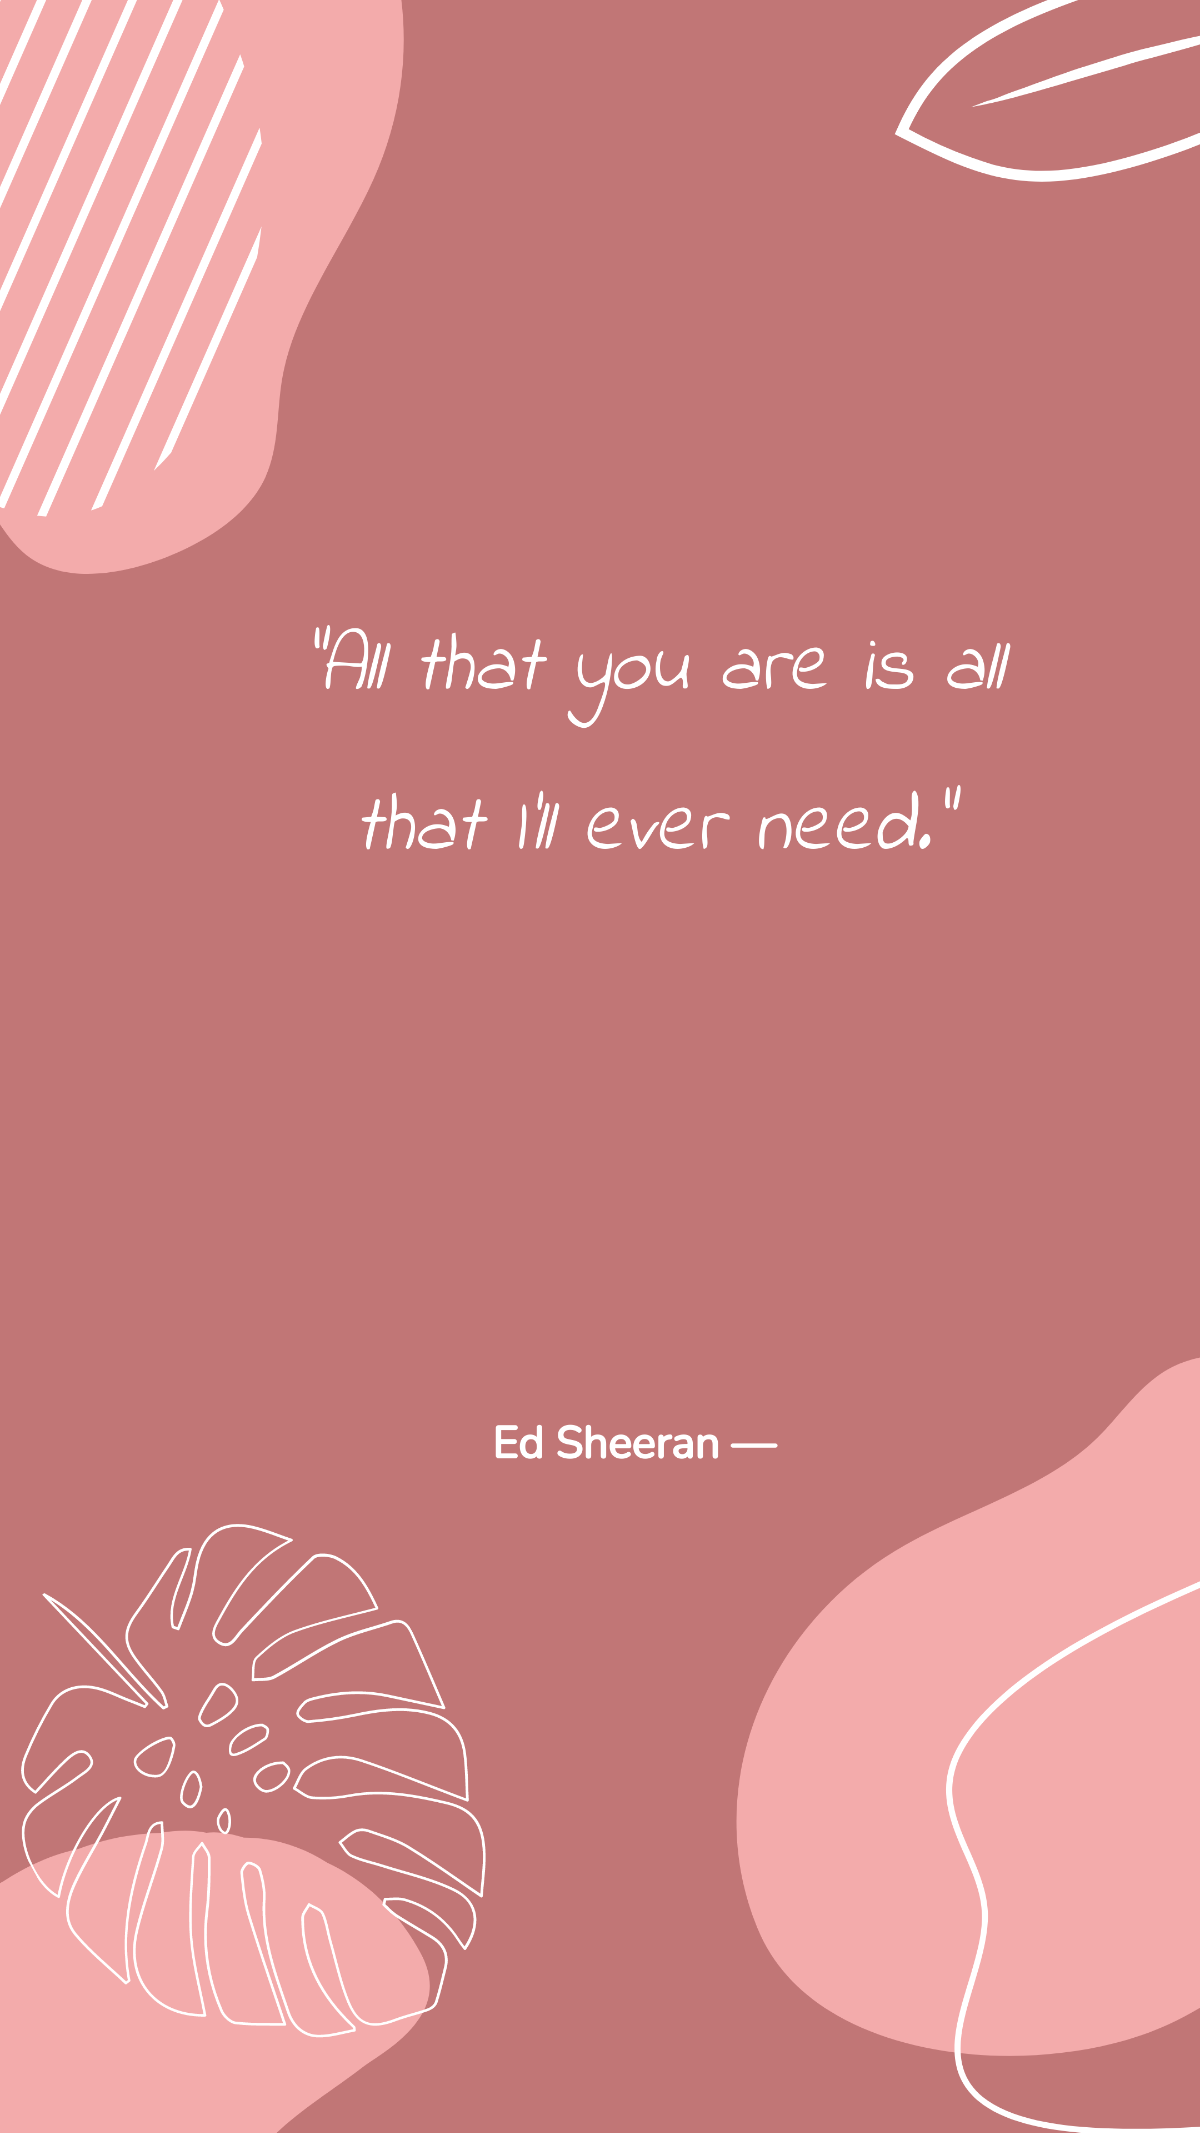 Ed Sheeran — ”All that you are is all that I’ll ever need.”